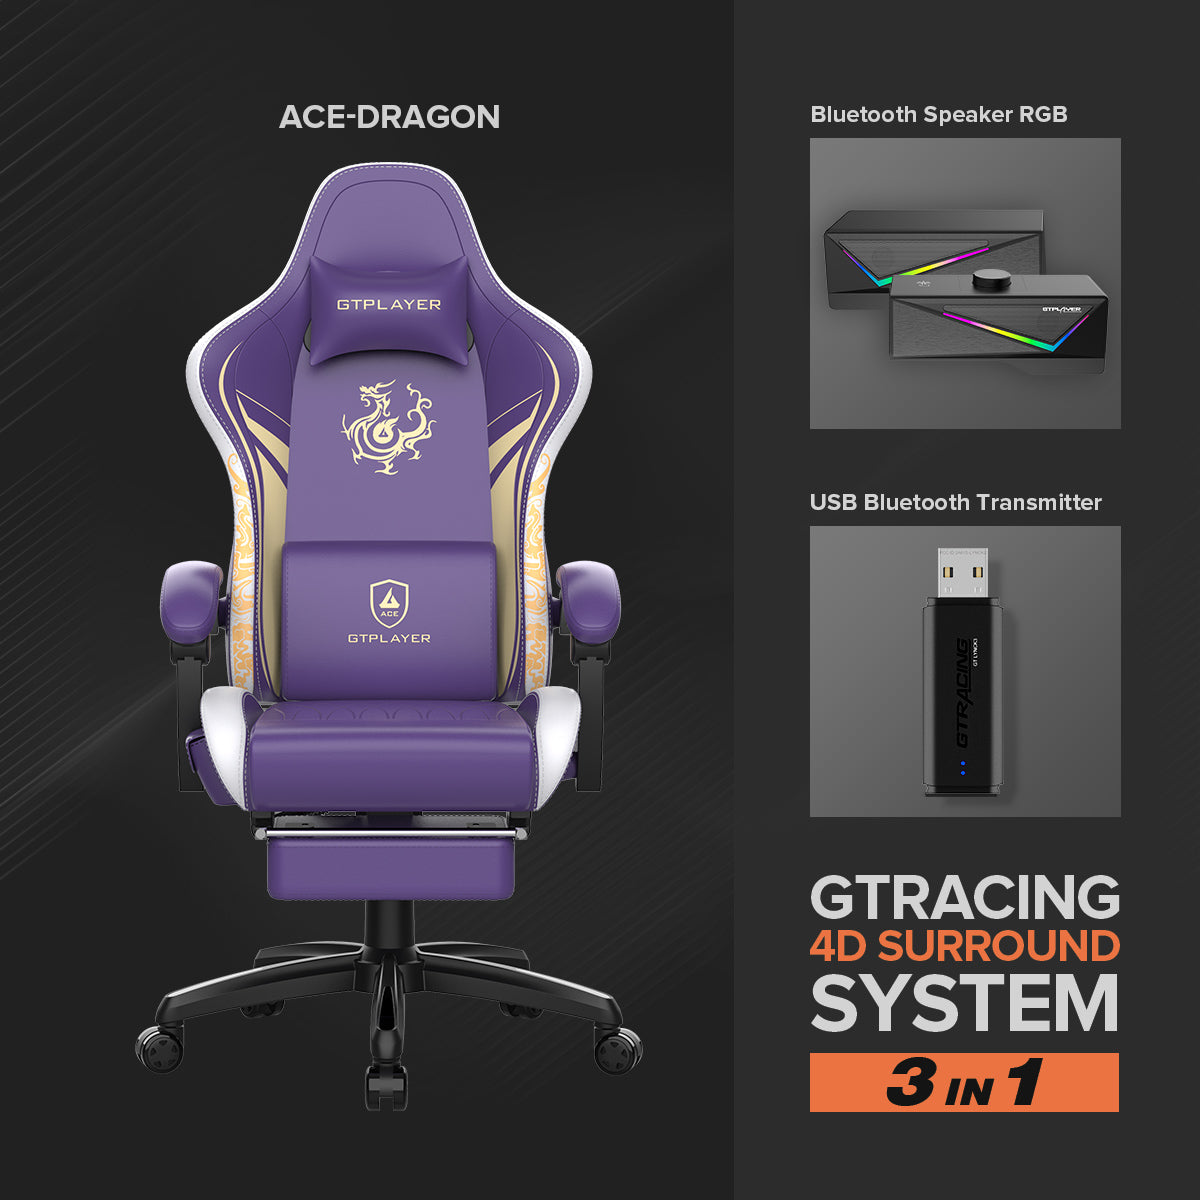 GTRACING 4D Surround System (Ace-Dragon, Bluetooth Speaker, and USB transmitter 3 in 1) - GTRACING